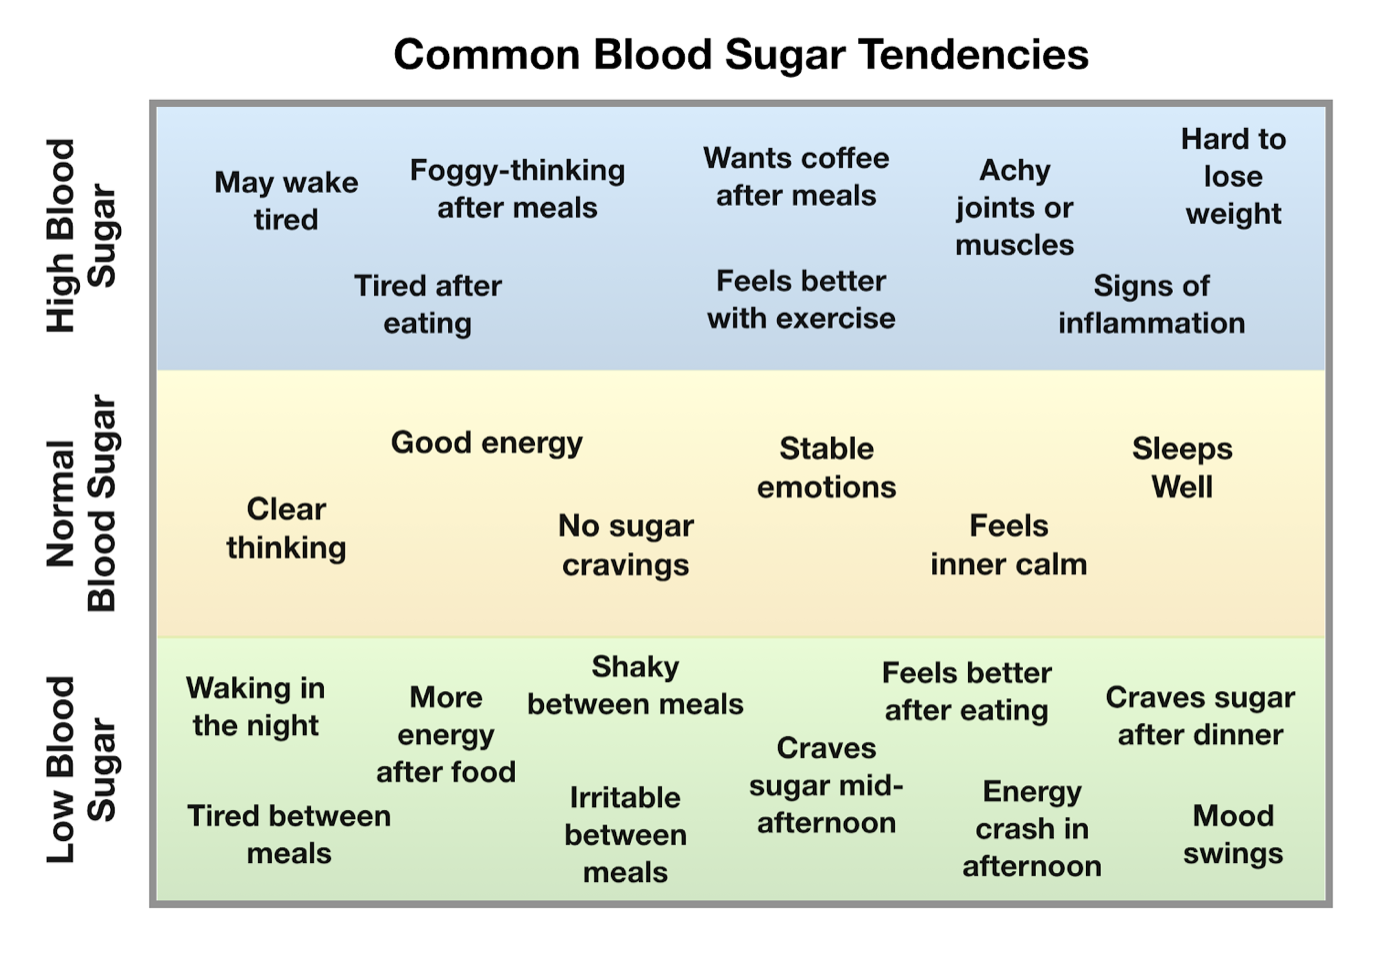 Approaches for managing sugar imbalances